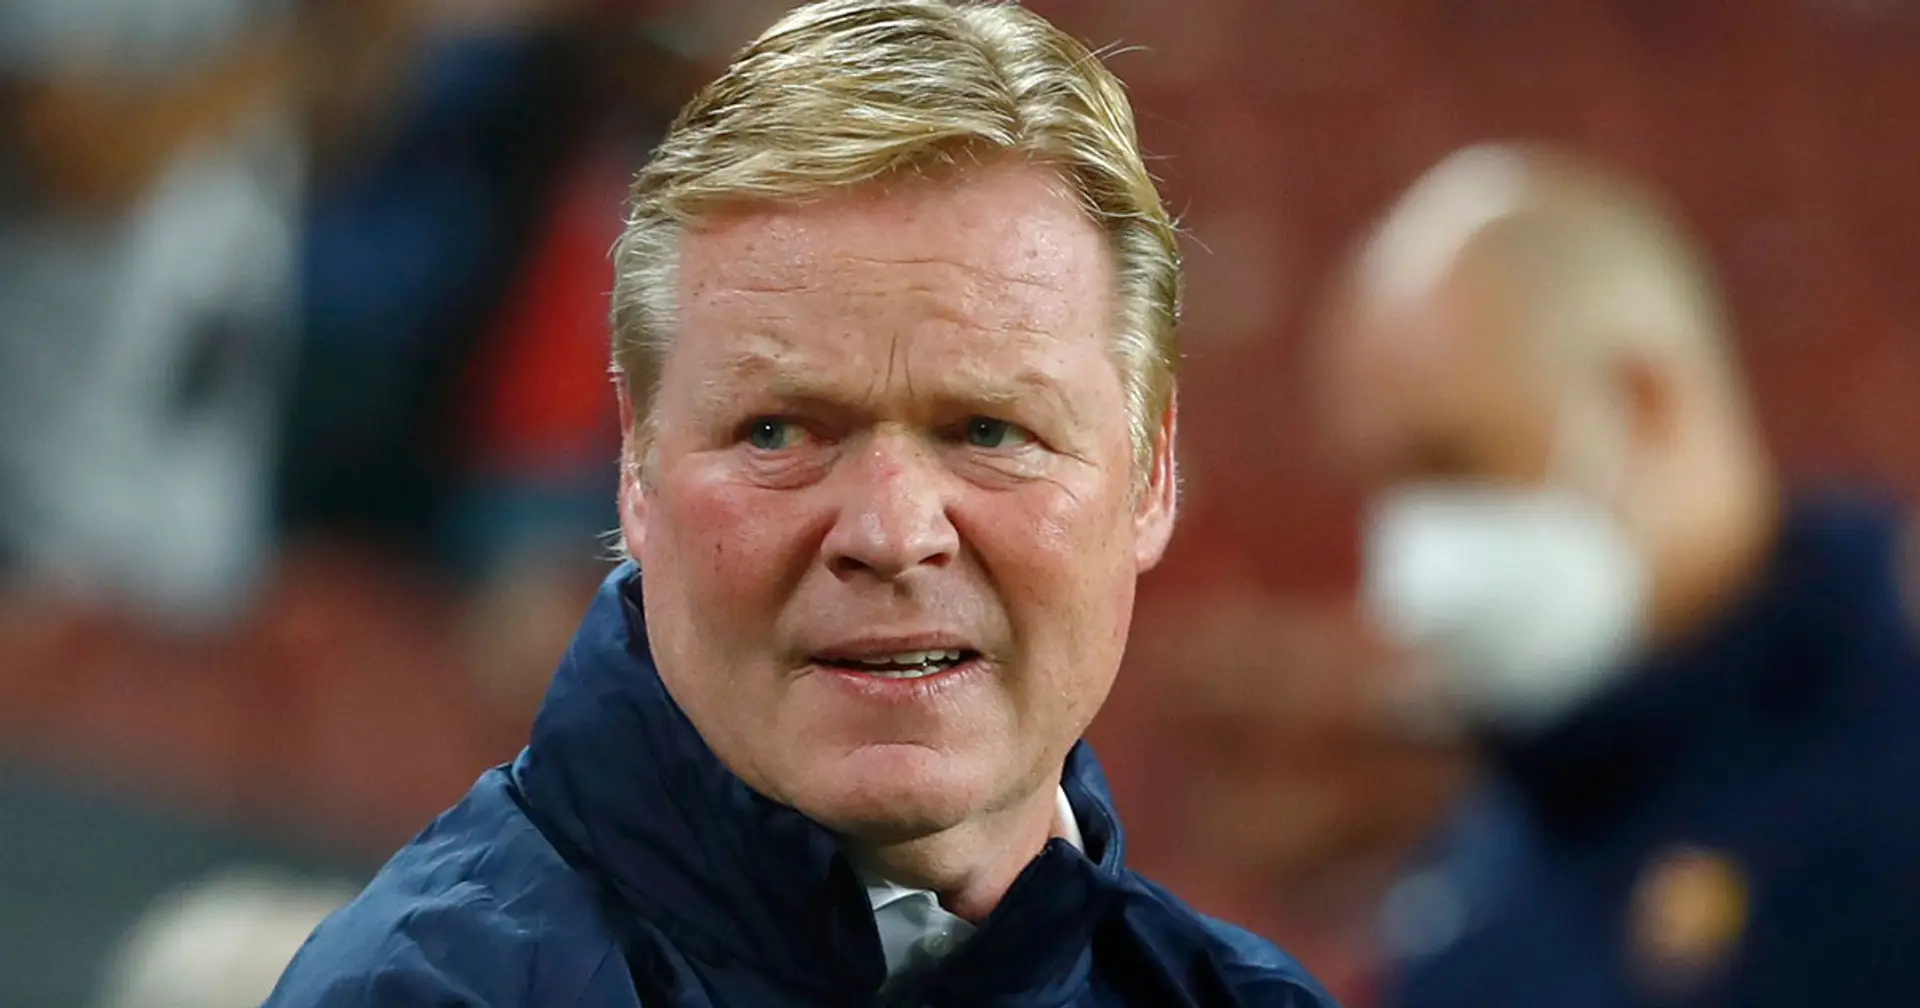 Koeman won't be sacked yet as Barca want 'tranquility' – top source